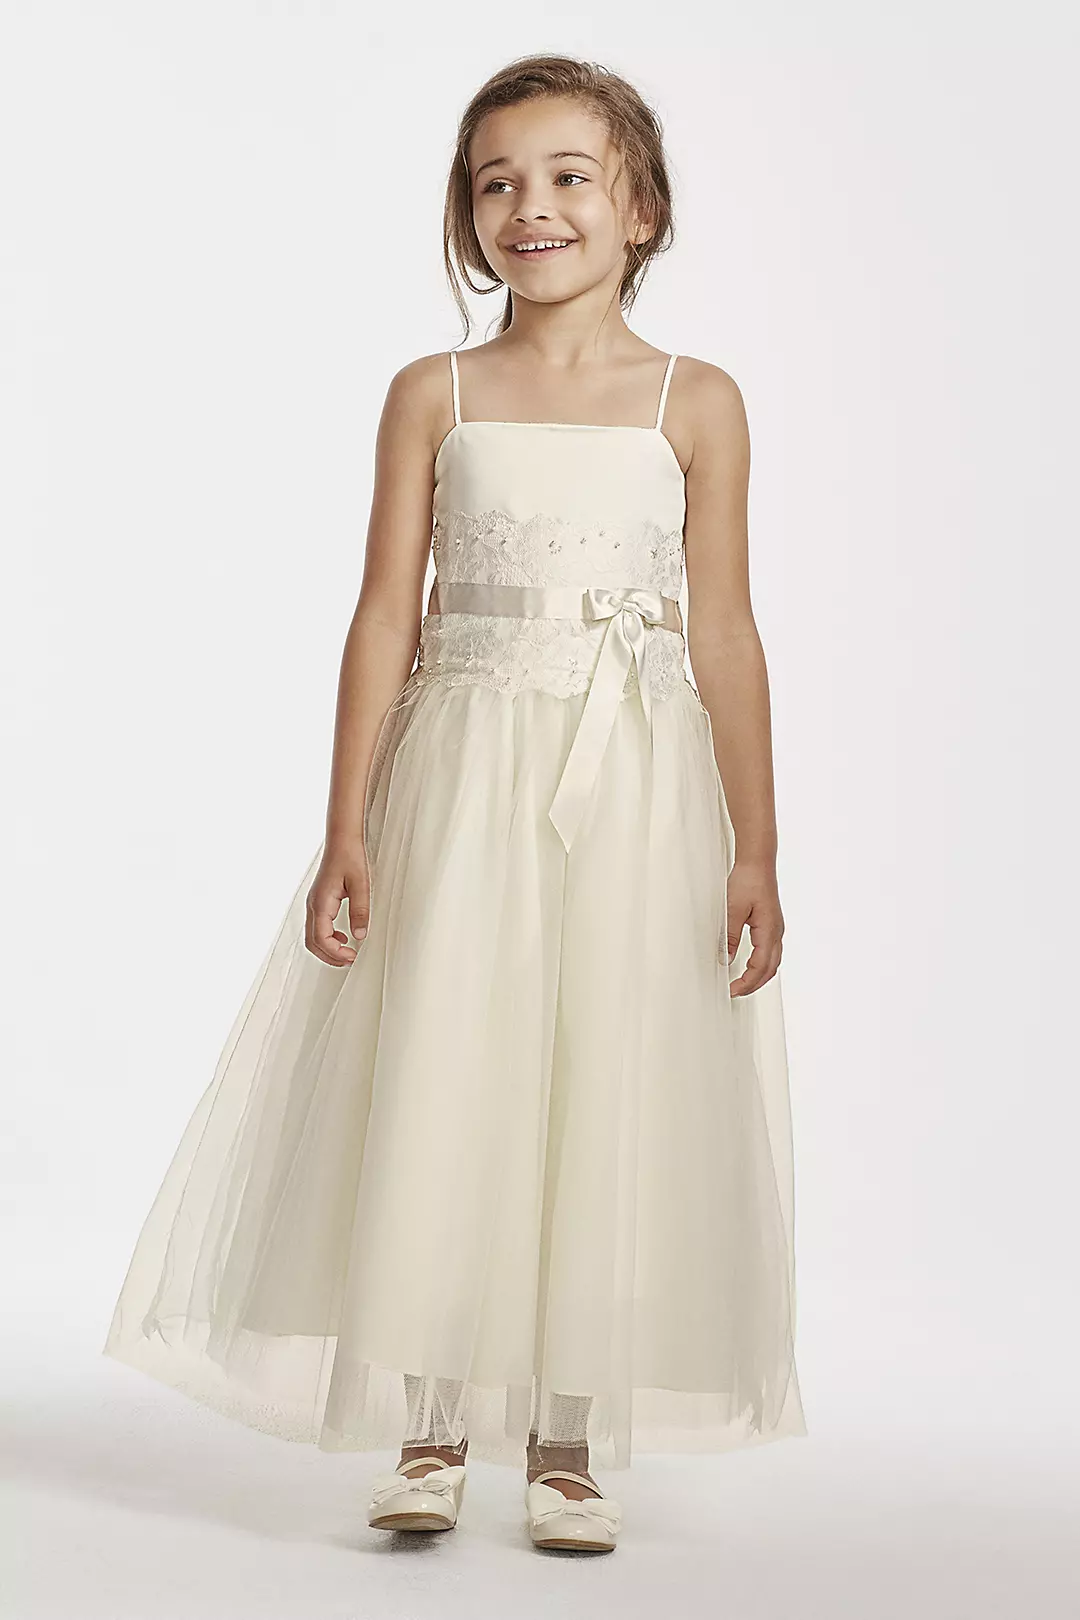 Flower Girl Lace and Tulle Spaghetti Strap Dress Image